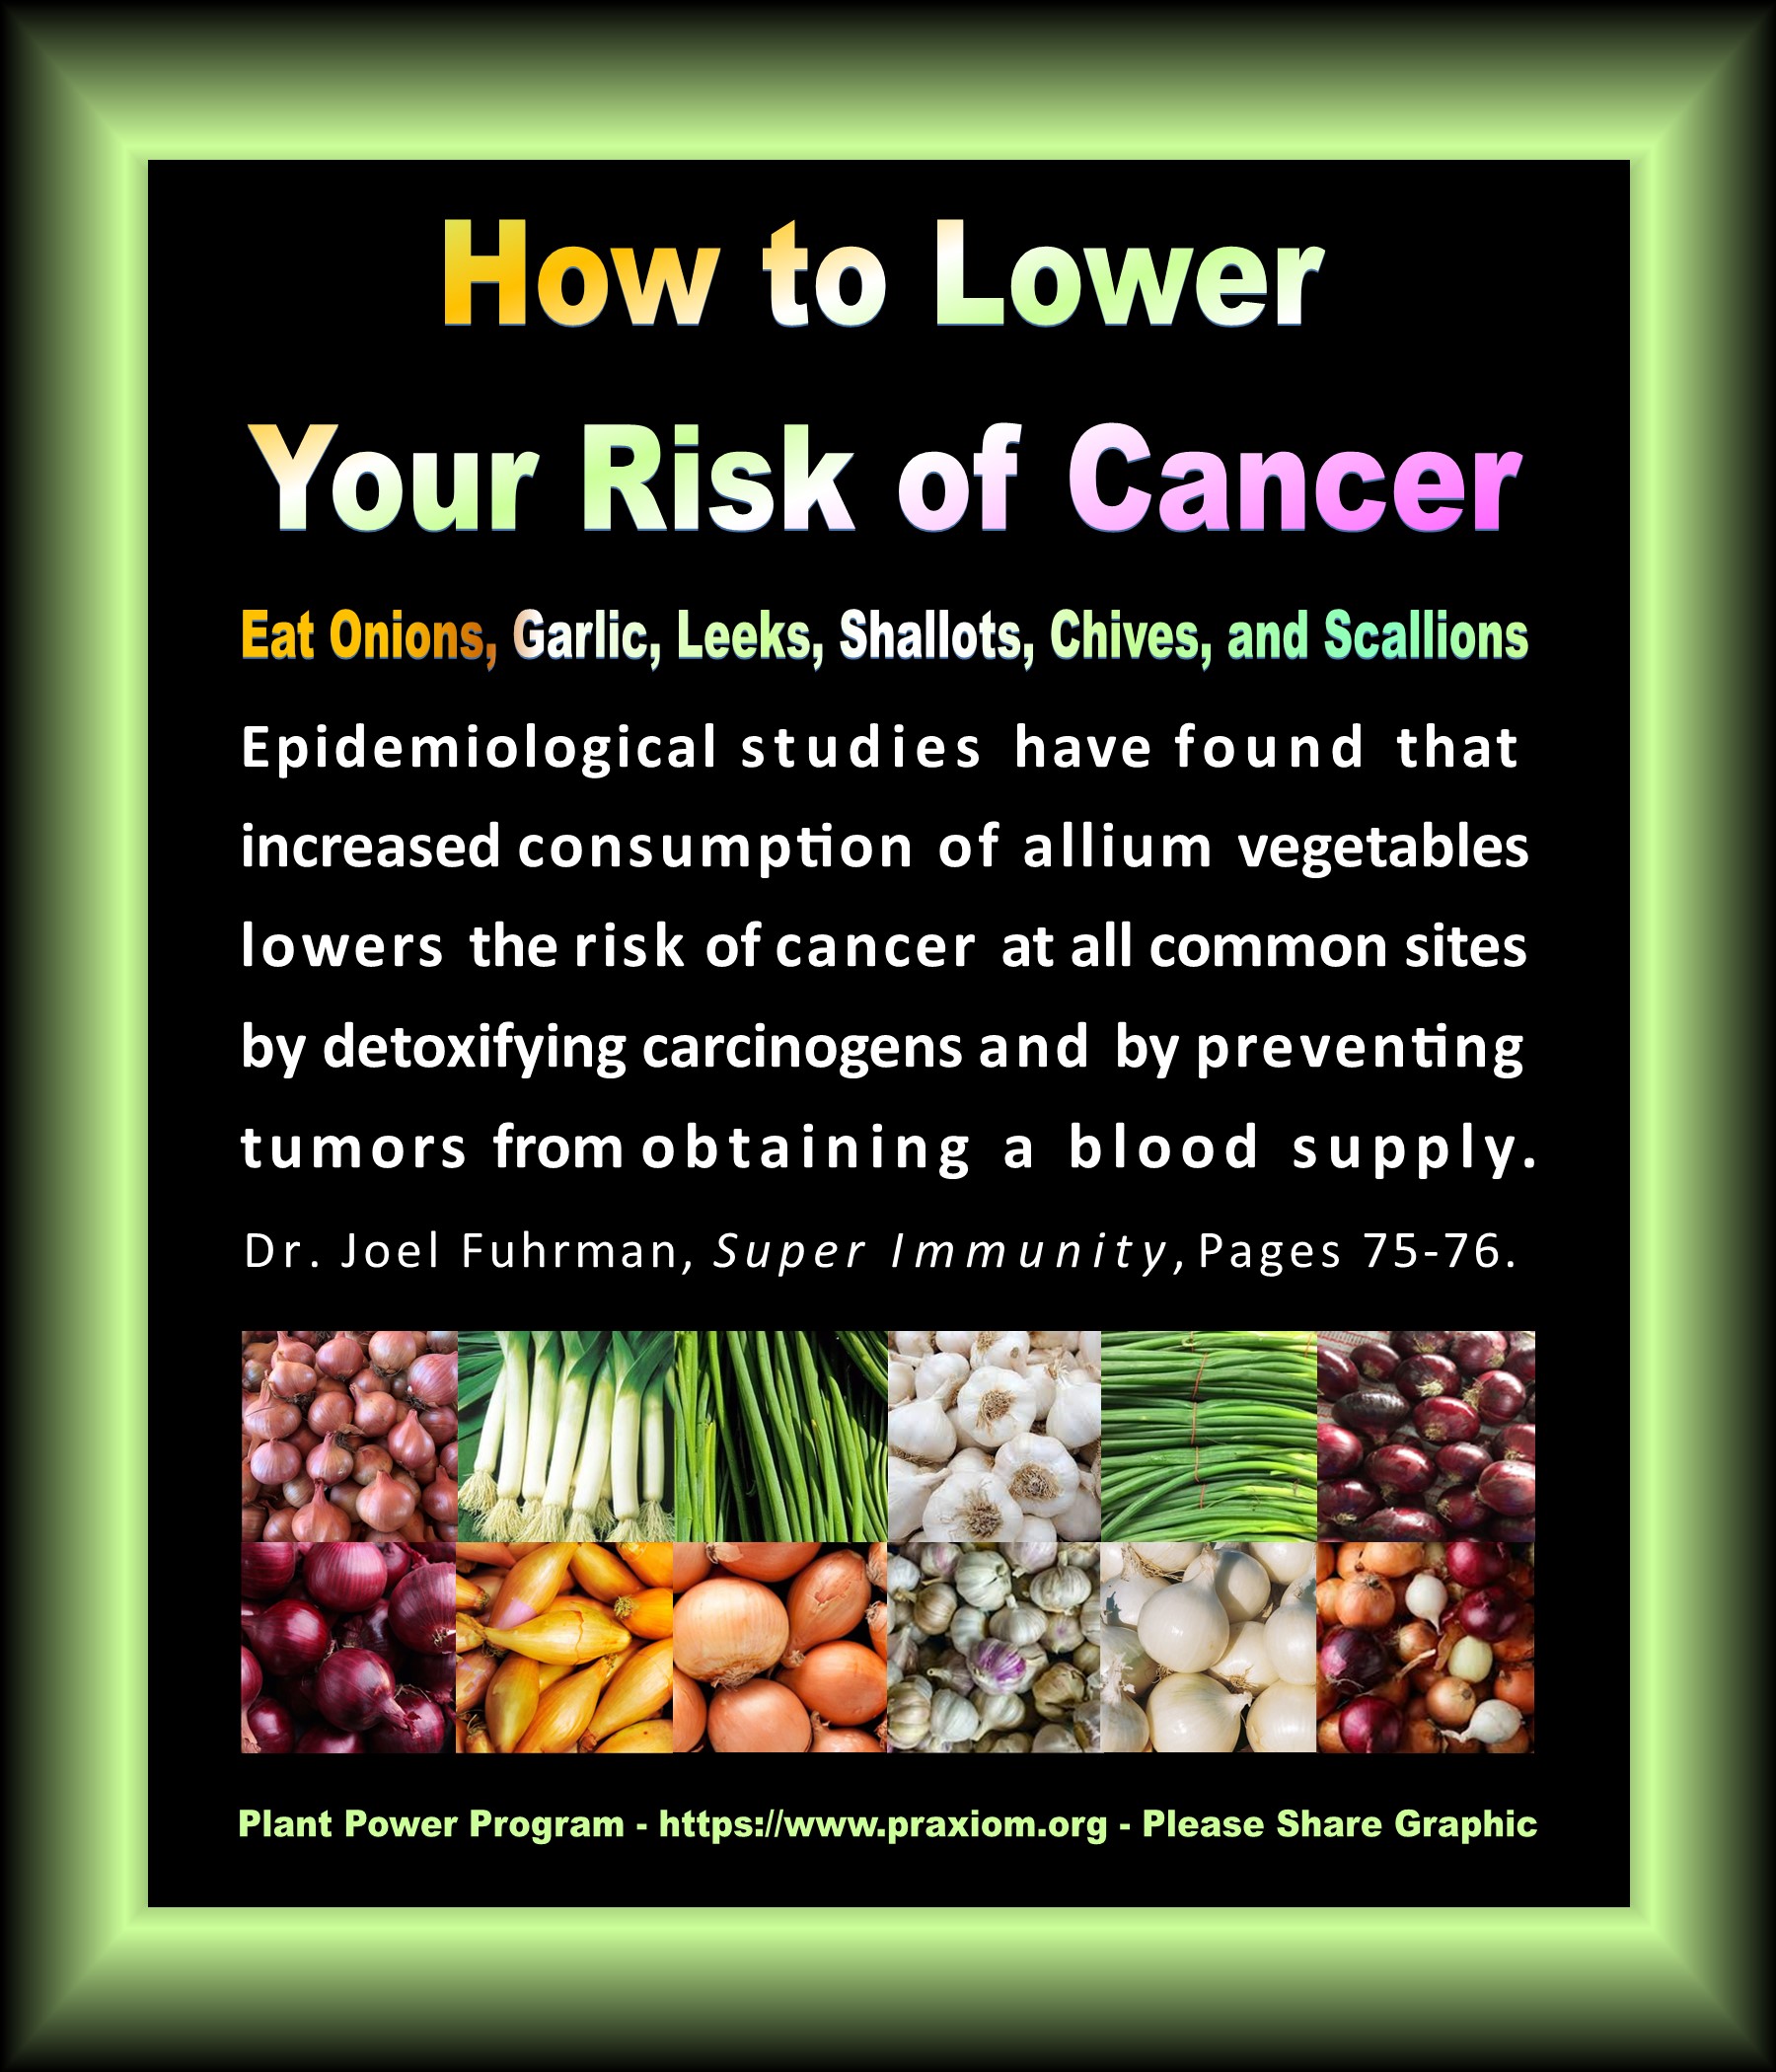 How to lower your risk of cancer